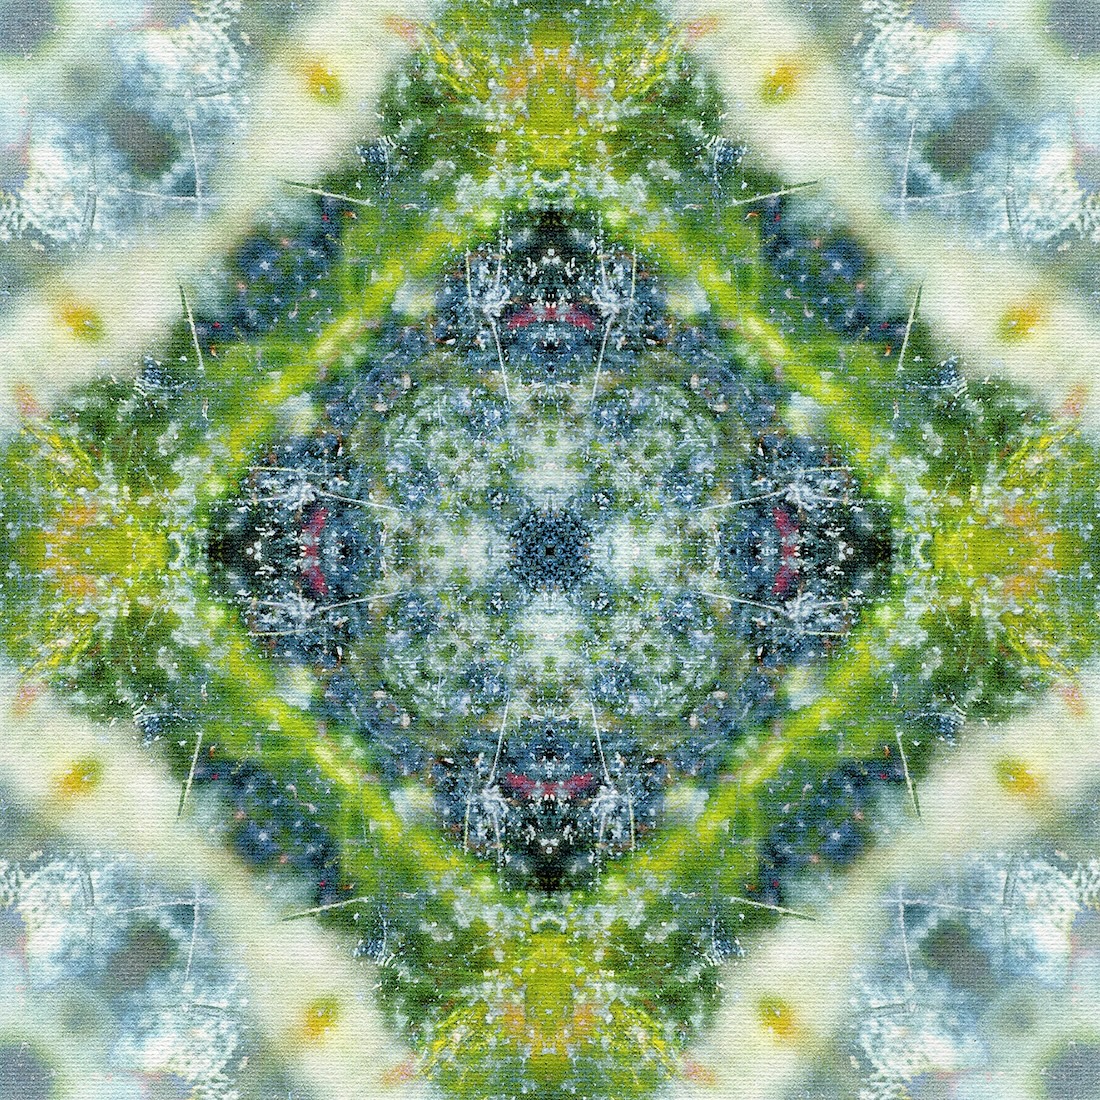 A diamond-shaped kaleidoscopic image, mostly in shades of green, blue, and white.